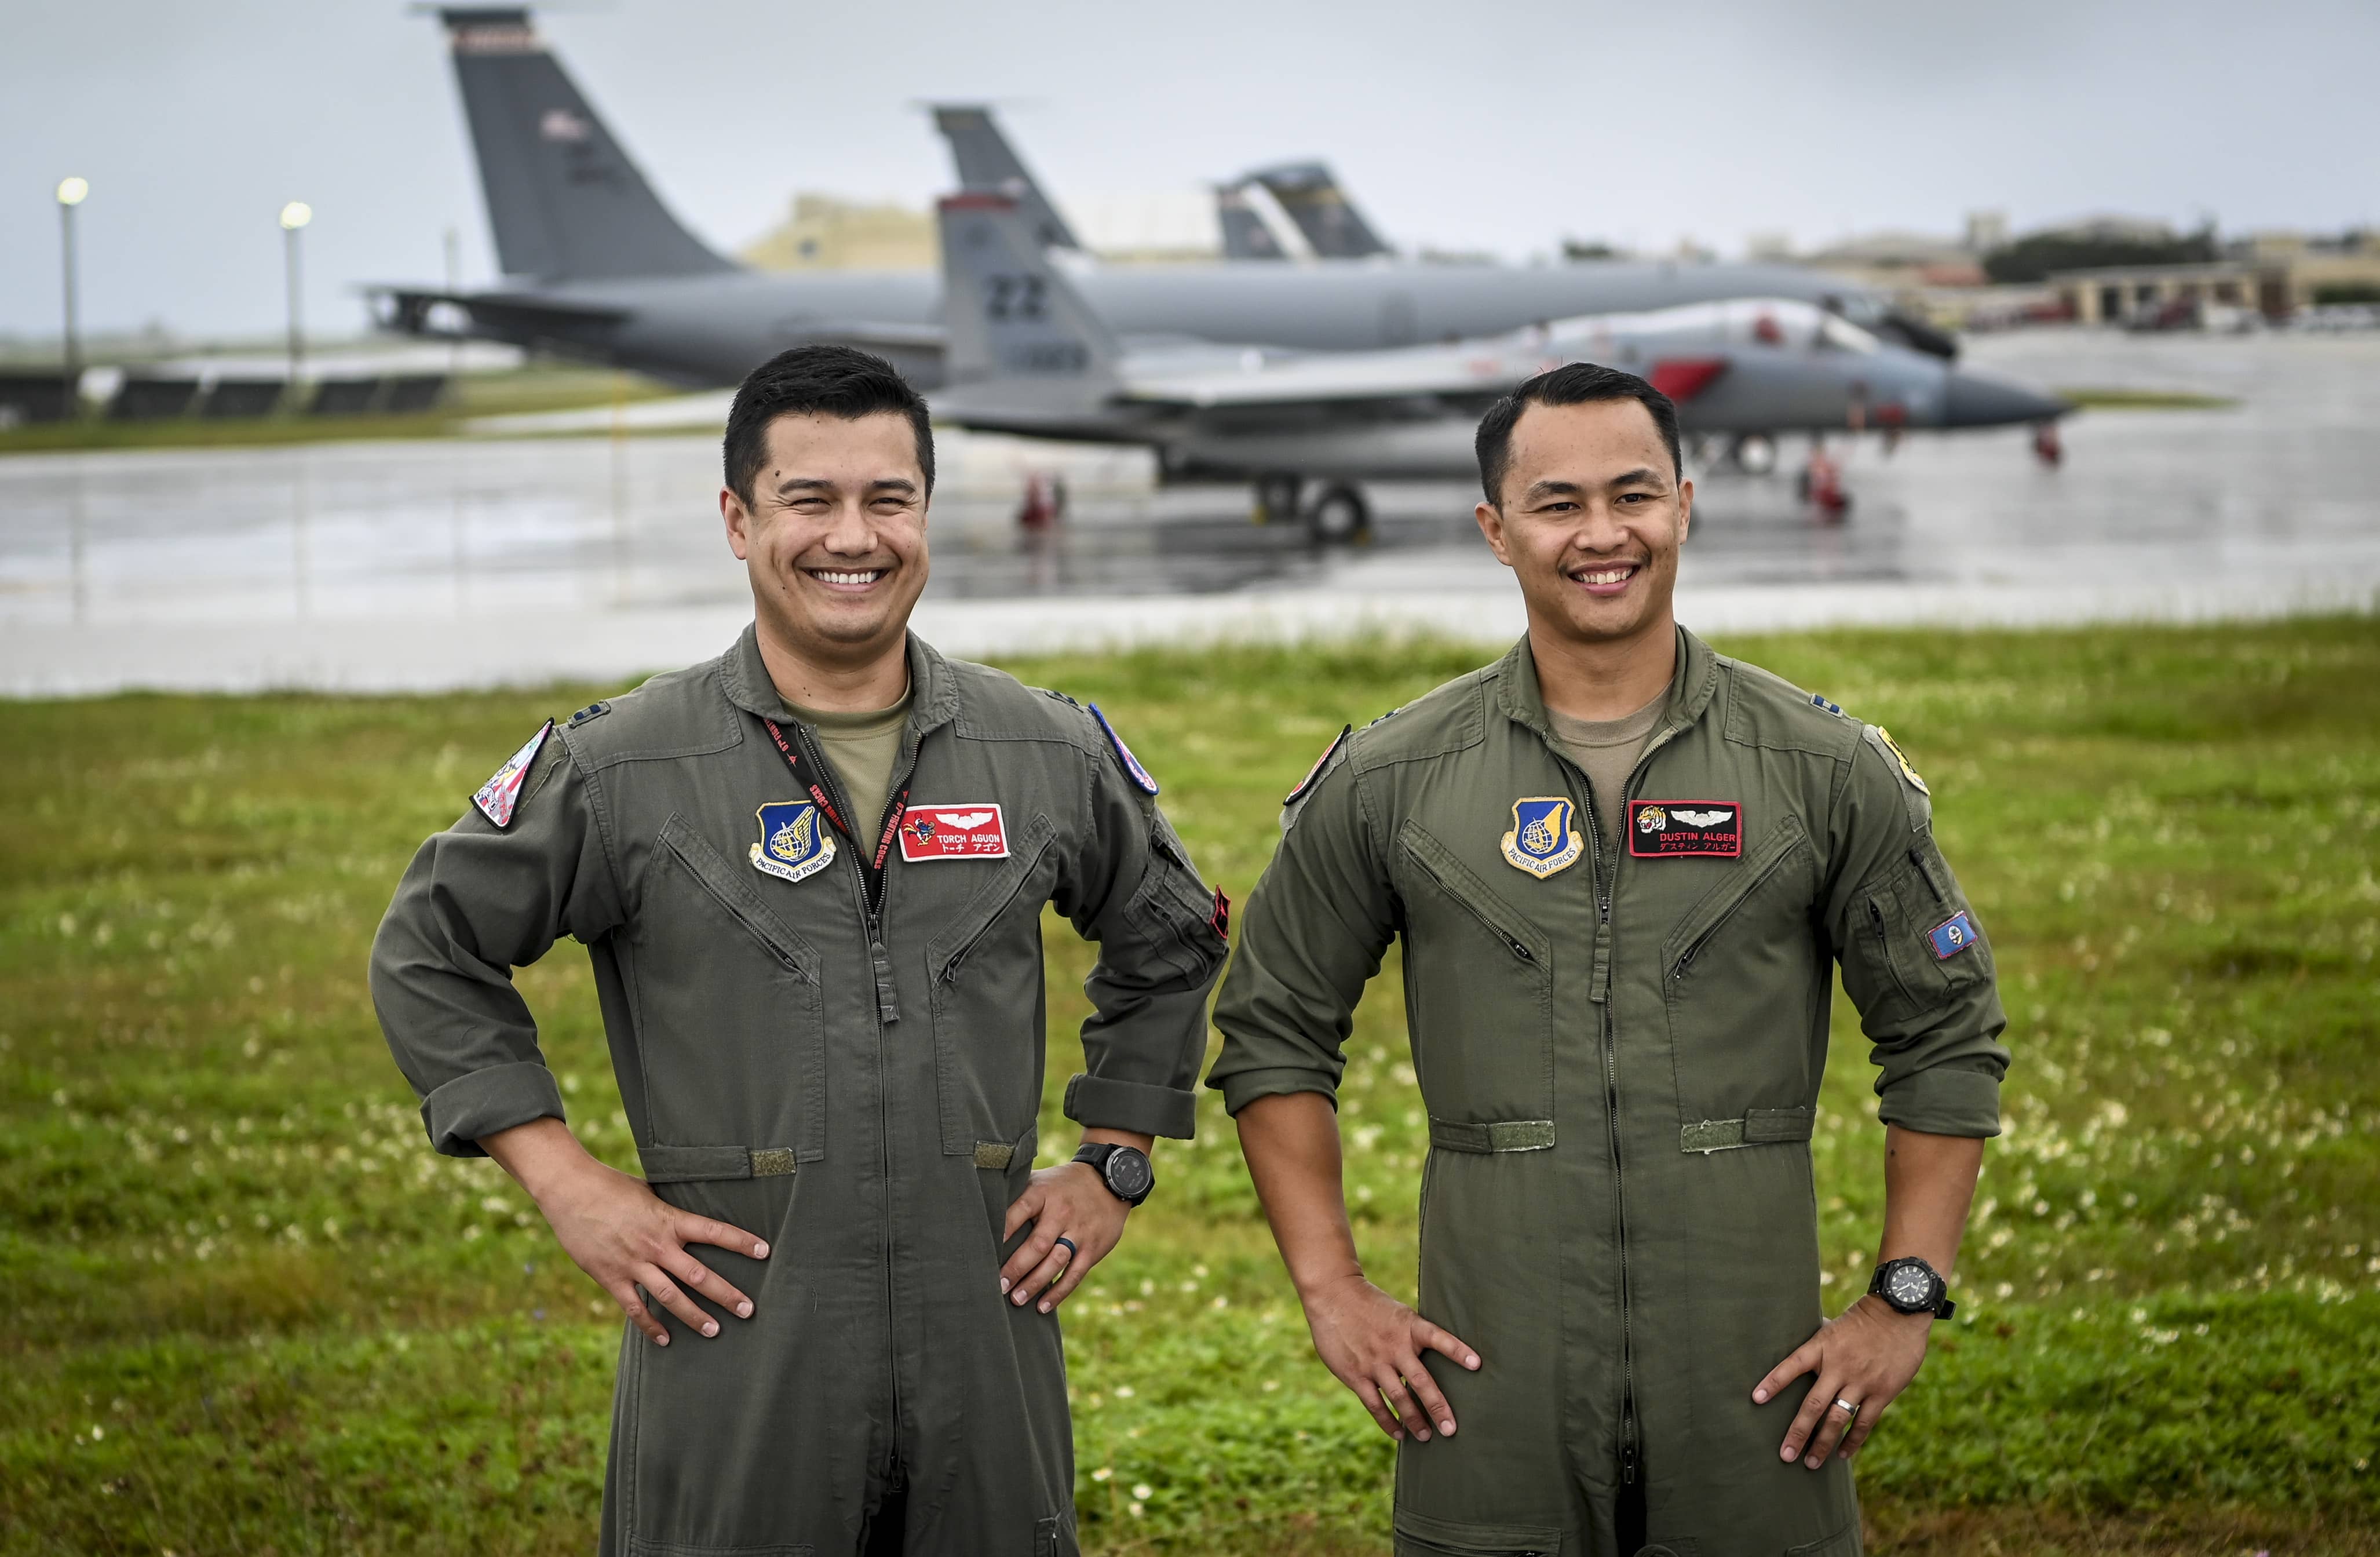 Two Air Force pilots